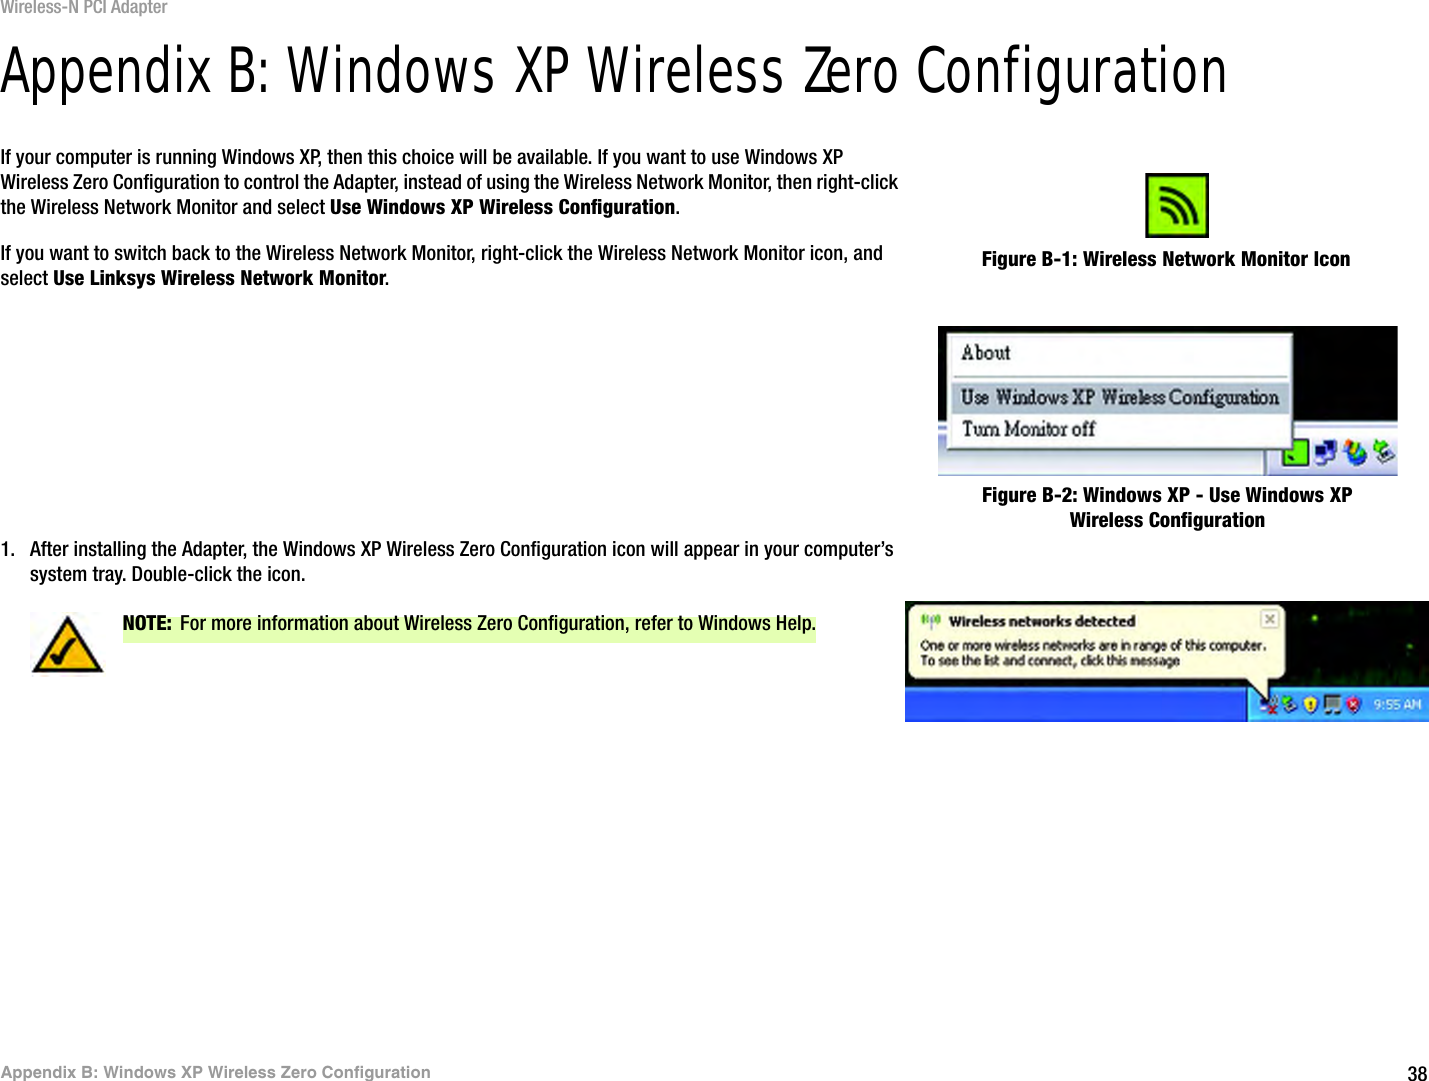 38Appendix B: Windows XP Wireless Zero ConfigurationWireless-N PCI AdapterAppendix B: Windows XP Wireless Zero ConfigurationIf your computer is running Windows XP, then this choice will be available. If you want to use Windows XP Wireless Zero Configuration to control the Adapter, instead of using the Wireless Network Monitor, then right-click the Wireless Network Monitor and select Use Windows XP Wireless Configuration. If you want to switch back to the Wireless Network Monitor, right-click the Wireless Network Monitor icon, and select Use Linksys Wireless Network Monitor.1. After installing the Adapter, the Windows XP Wireless Zero Configuration icon will appear in your computer’s system tray. Double-click the icon. Figure B-1: Wireless Network Monitor IconFigure B-2: Windows XP - Use Windows XP Wireless ConfigurationNOTE: For more information about Wireless Zero Configuration, refer to Windows Help.Figure B-3: Windows XP Wireless Zero Configuration Icon